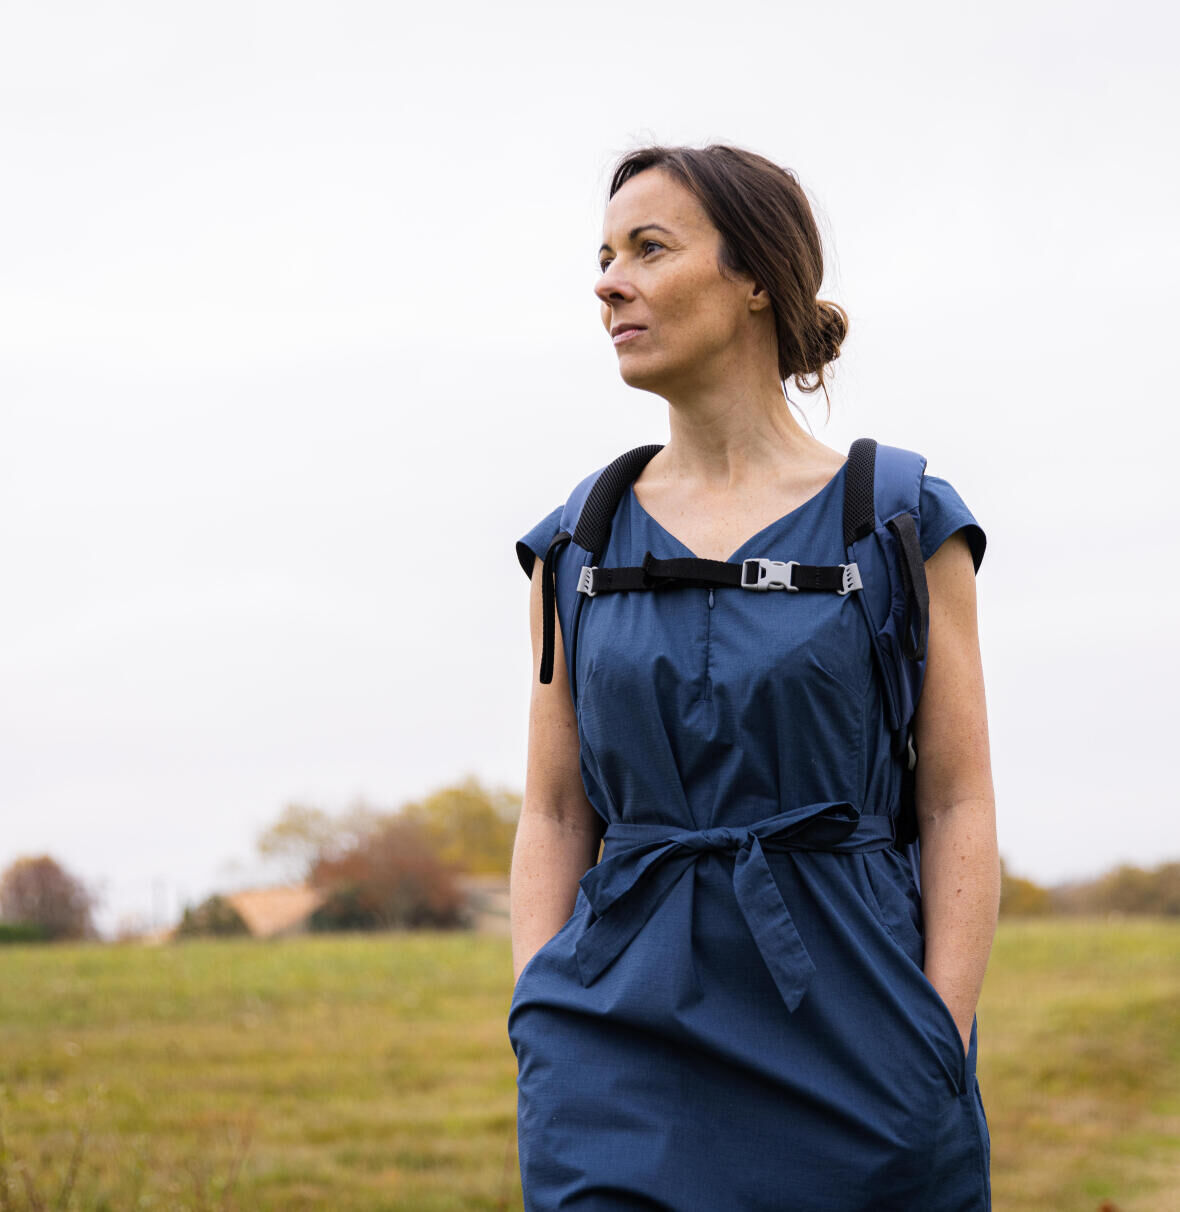 They co-created two hiking dresses!